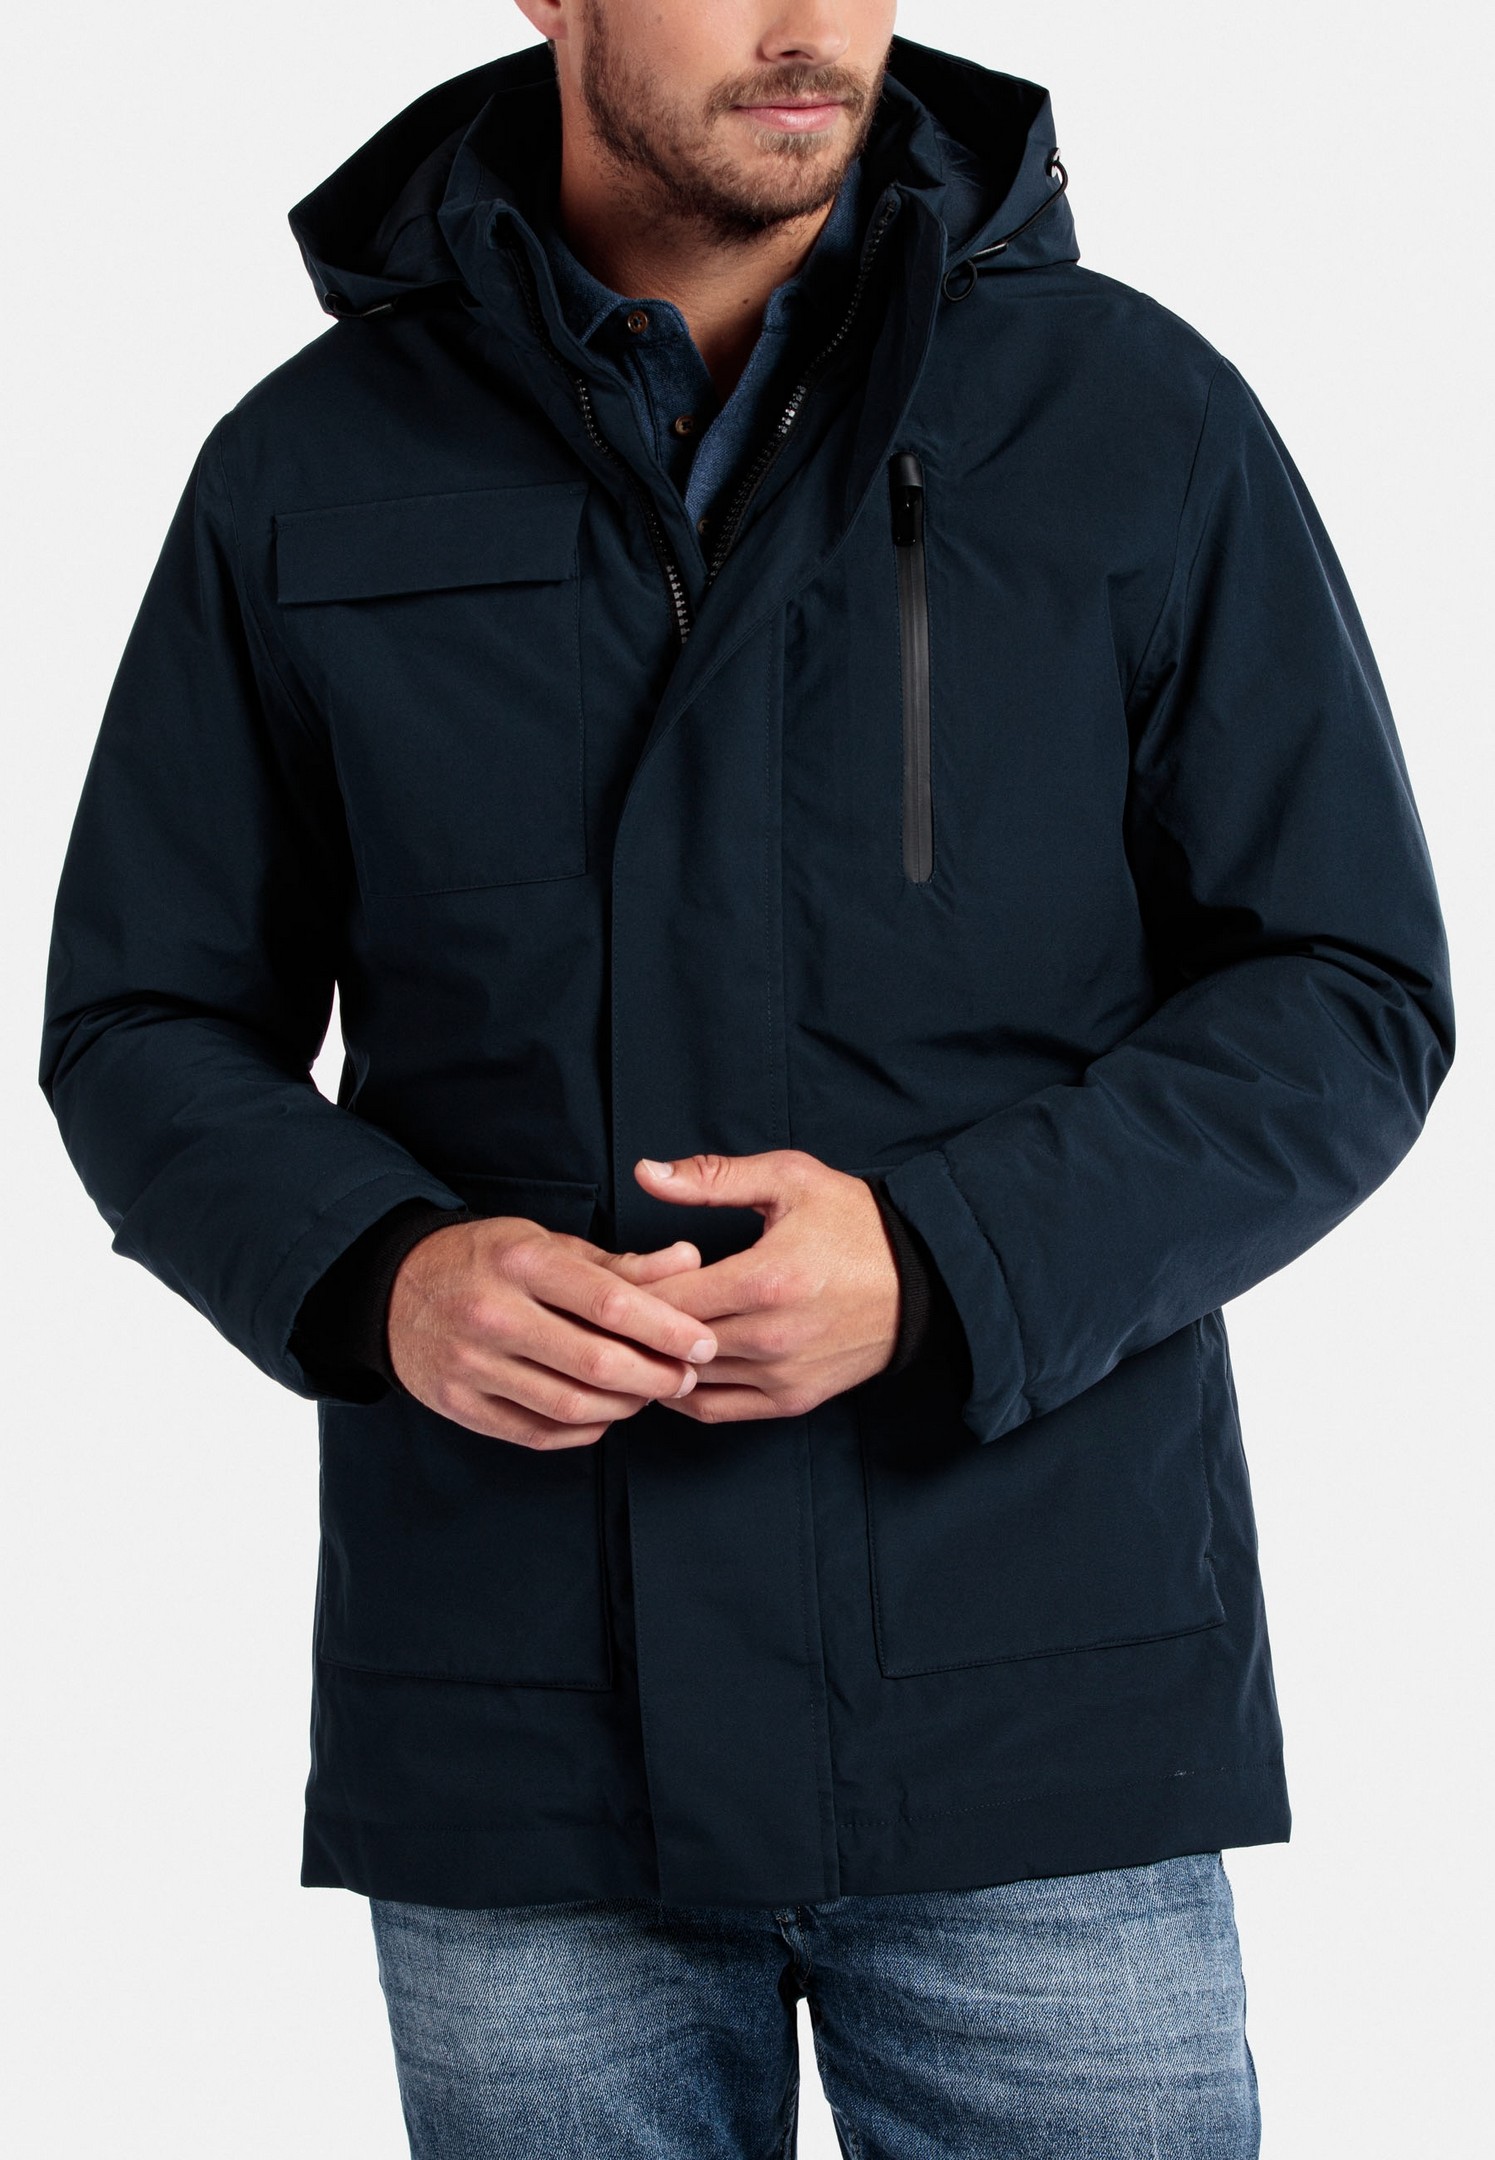 Giordano Jacket Removable Dark Windproof Hood | Men\'s Navy Water Rozing and Fashion Jan